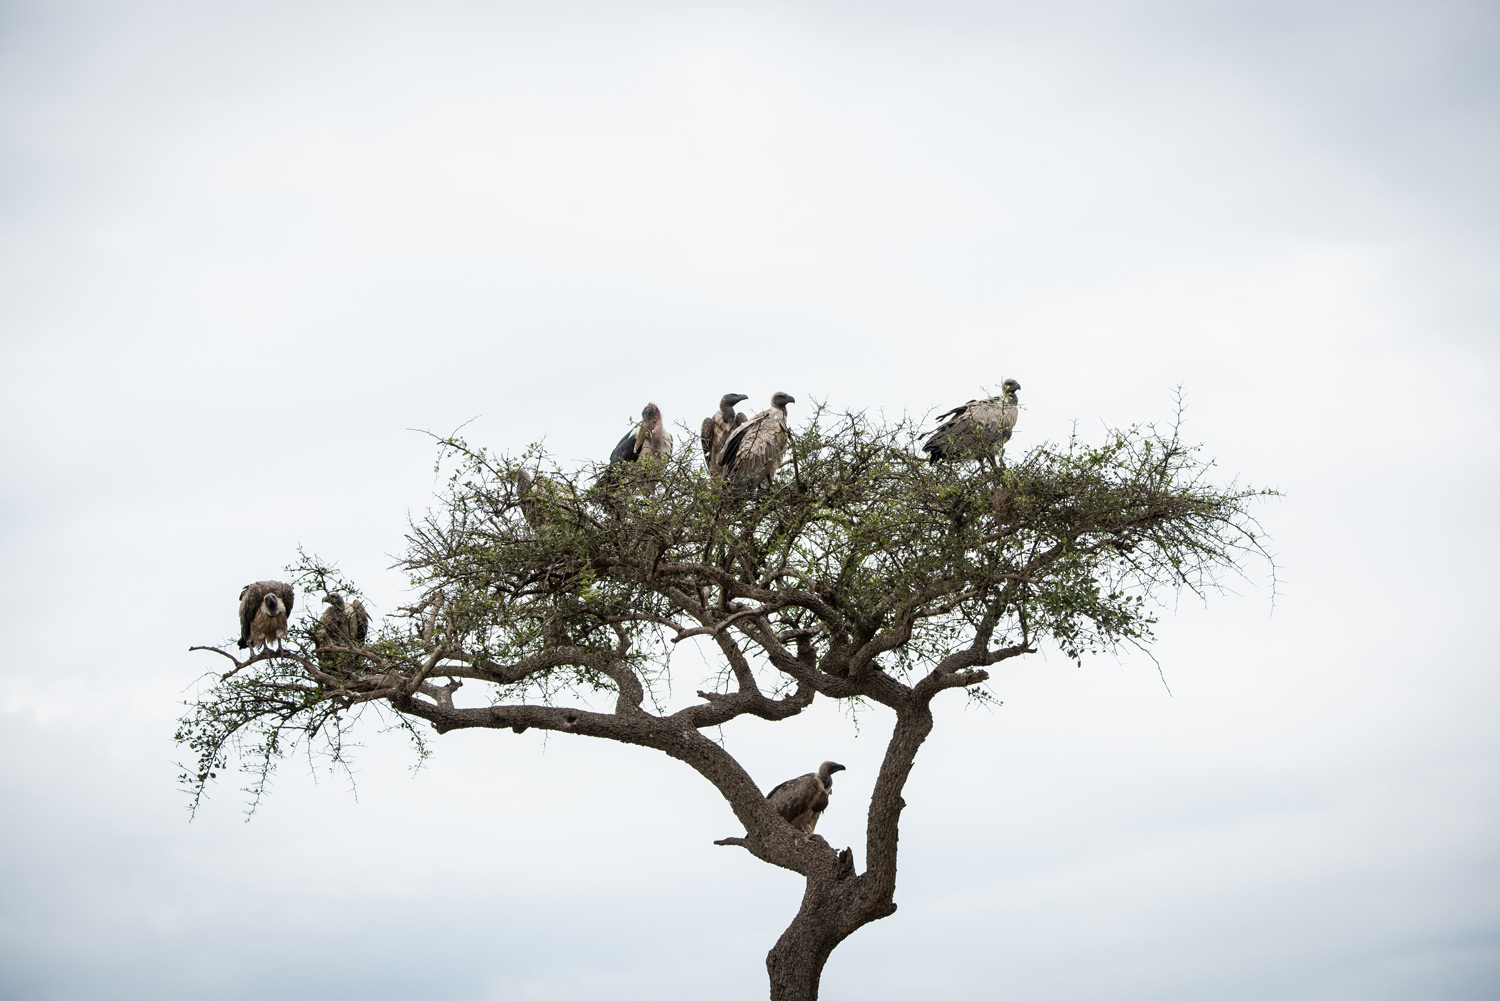 Vultures sitting in a tree